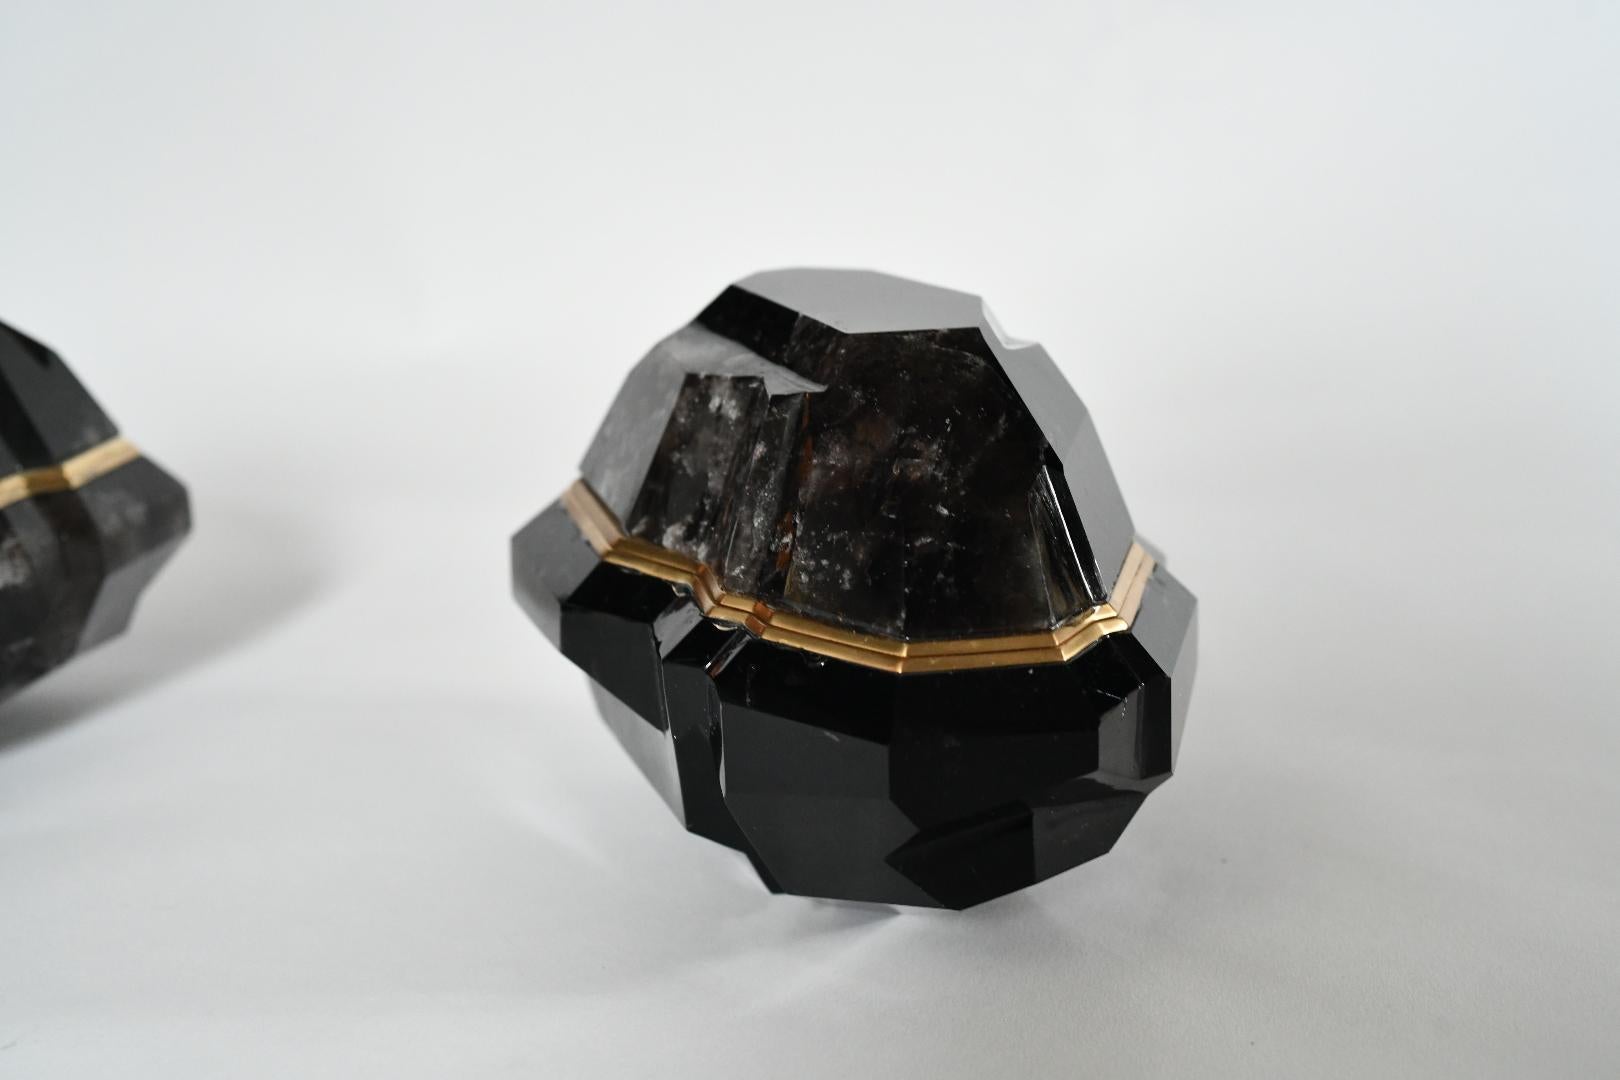 Contemporary Multifaceted Smoky Rock Crystal Boxes by Phoenix For Sale